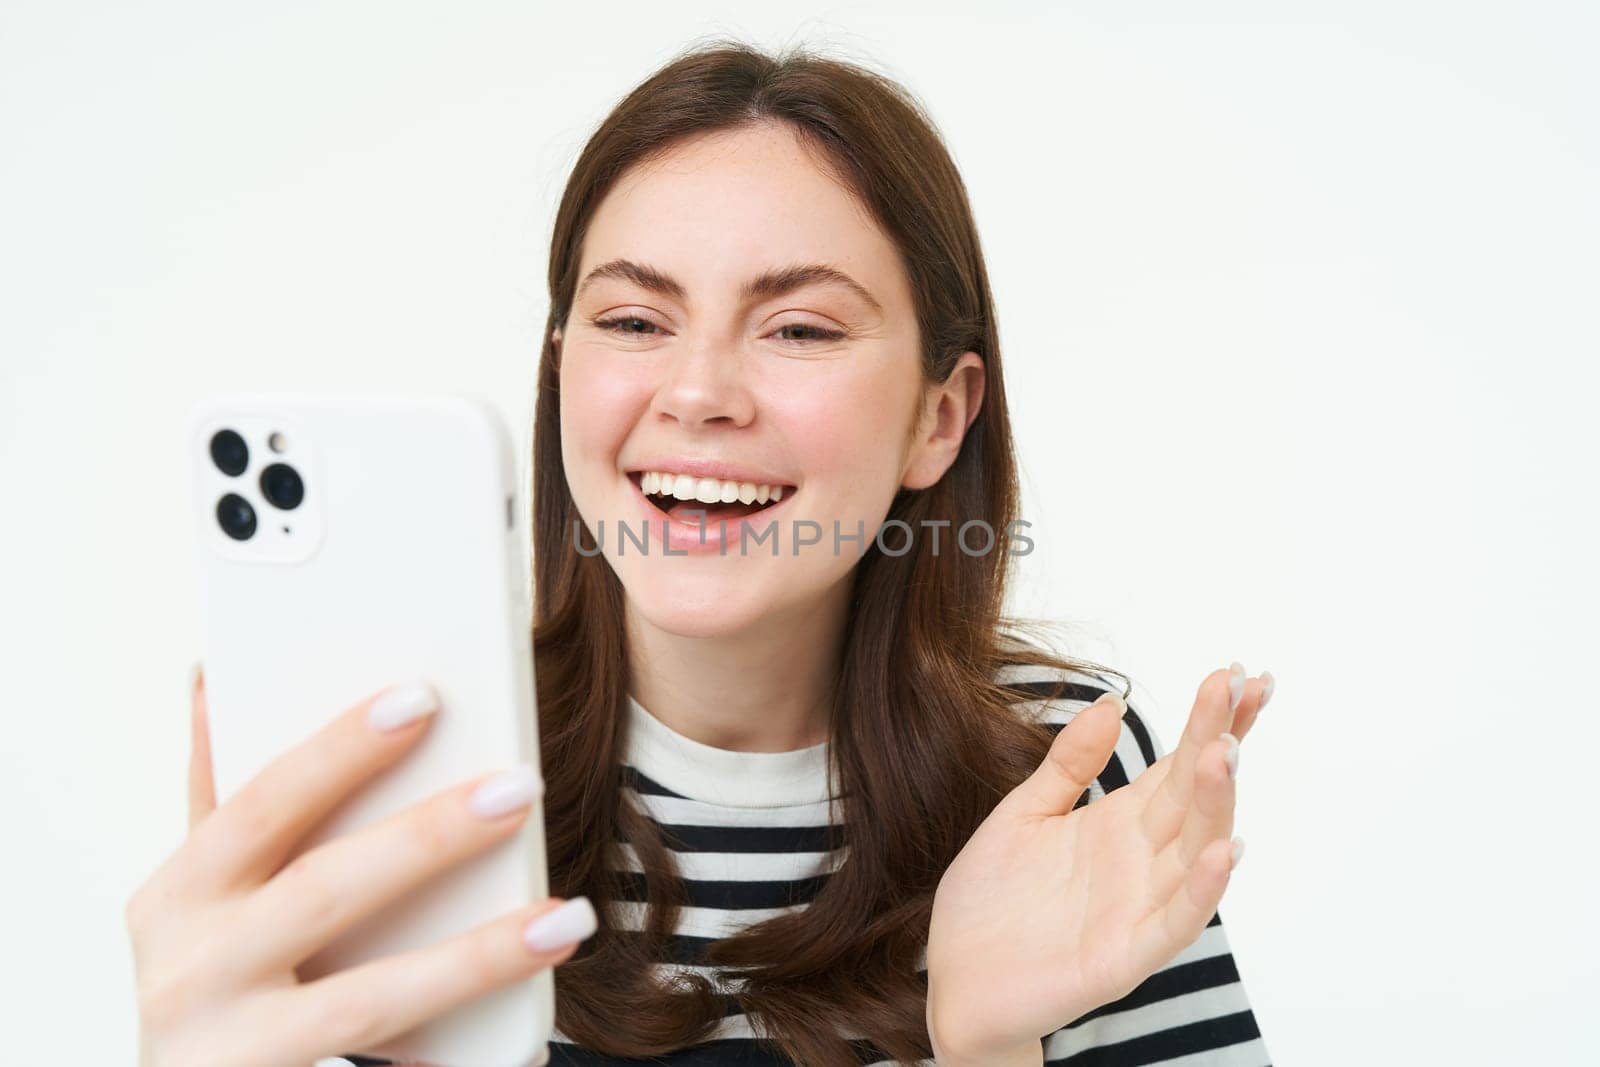 Portrait of woman chats on mobile phone video app, talks at smartphone camera, laughing and looking at telephone.